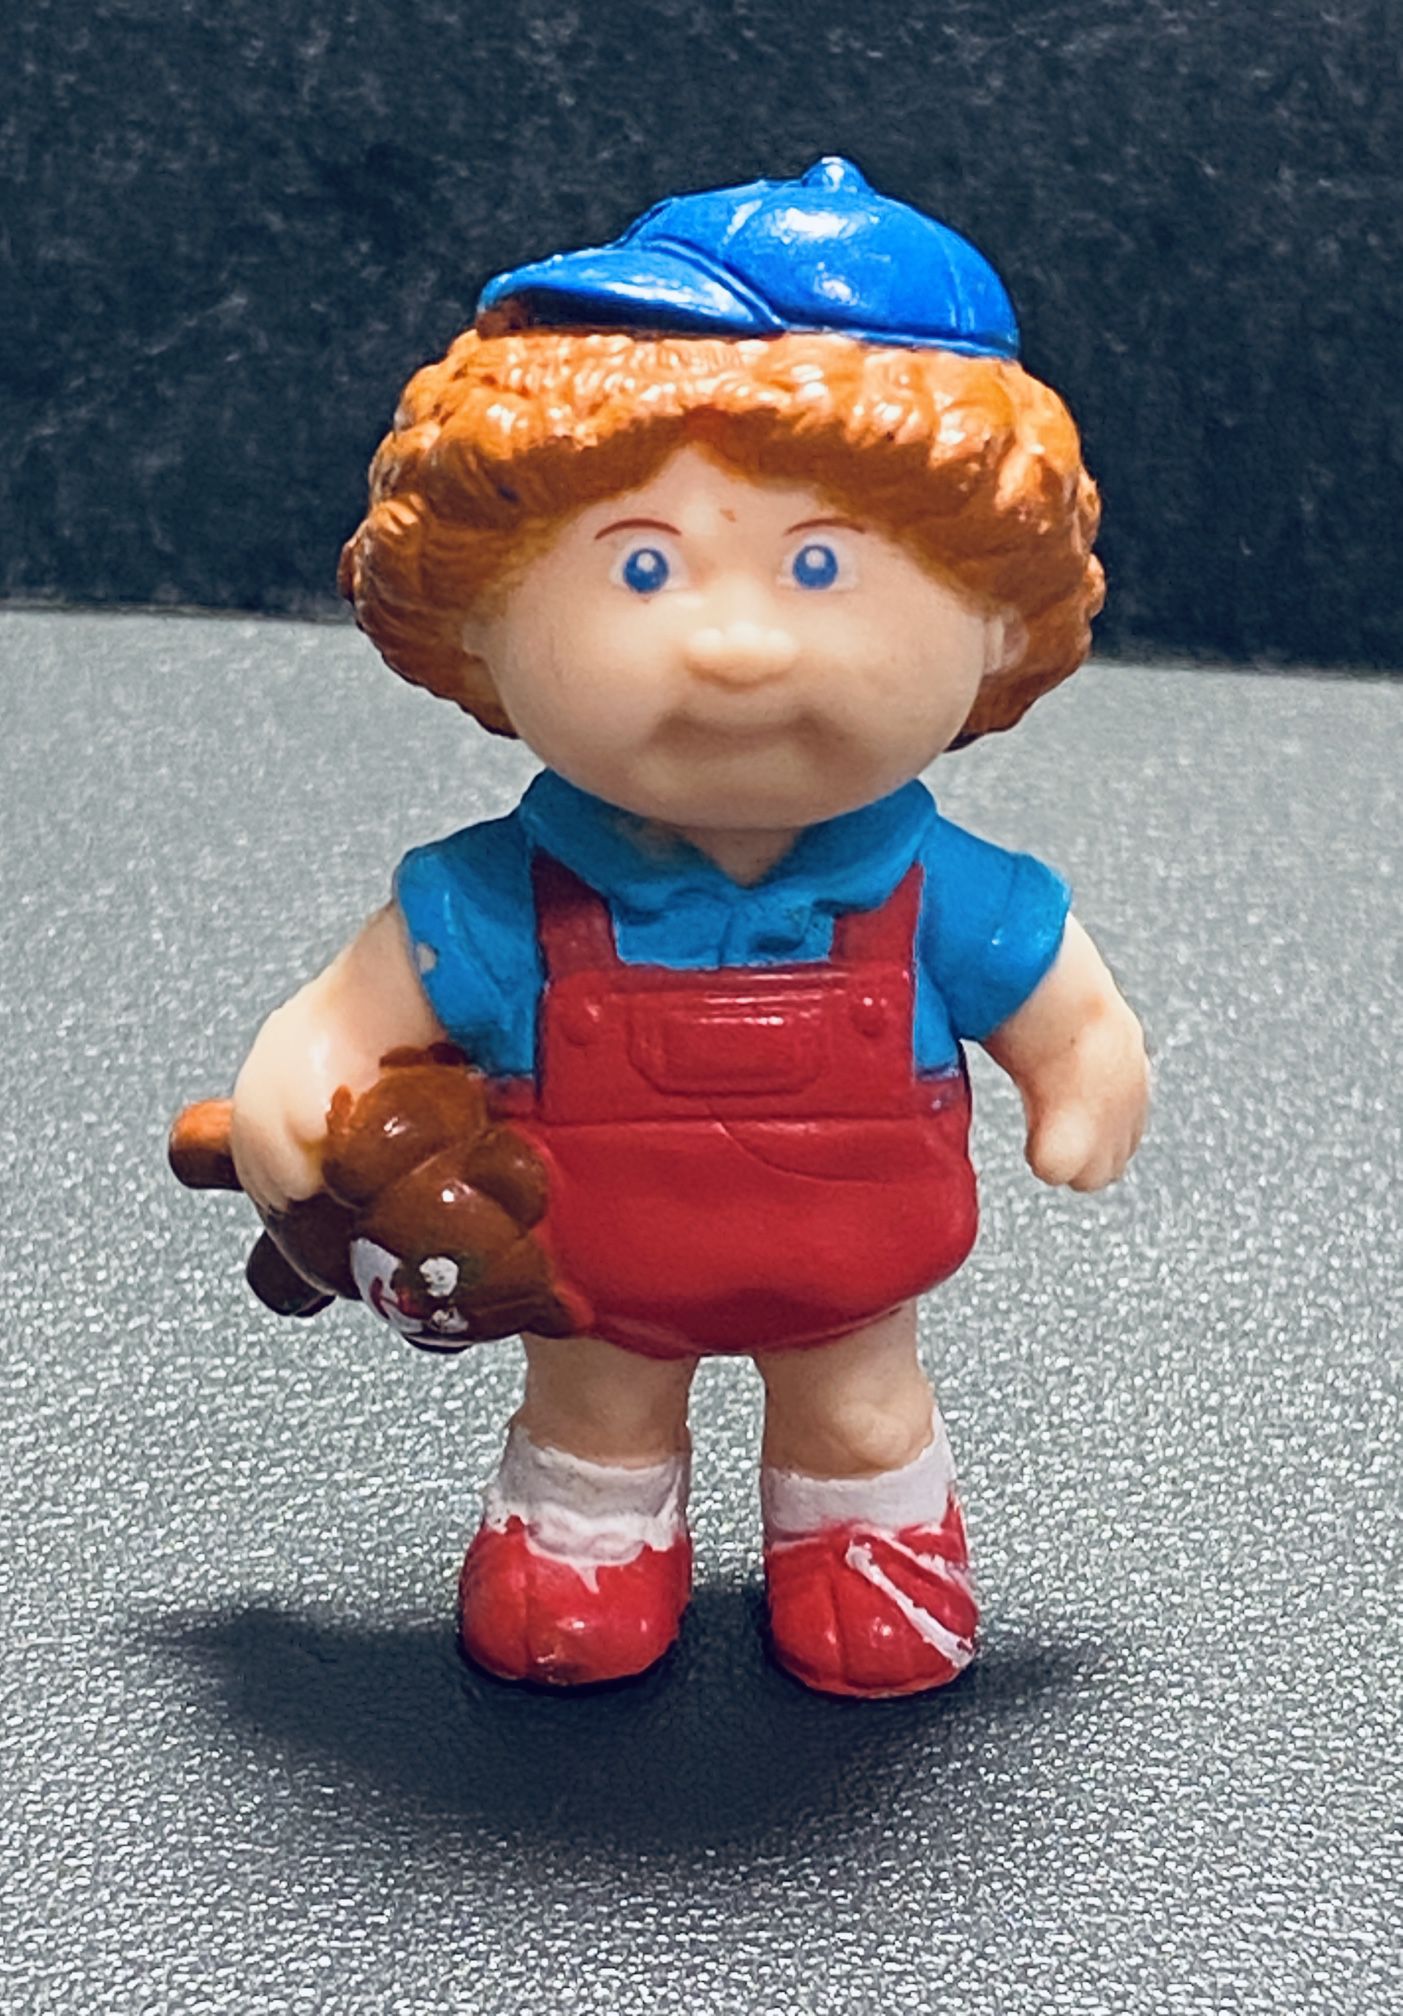 VNTG Cabbage PatchKids 2" PVC 1984 Figure Little Red Haired Boy w/Teddy Bear